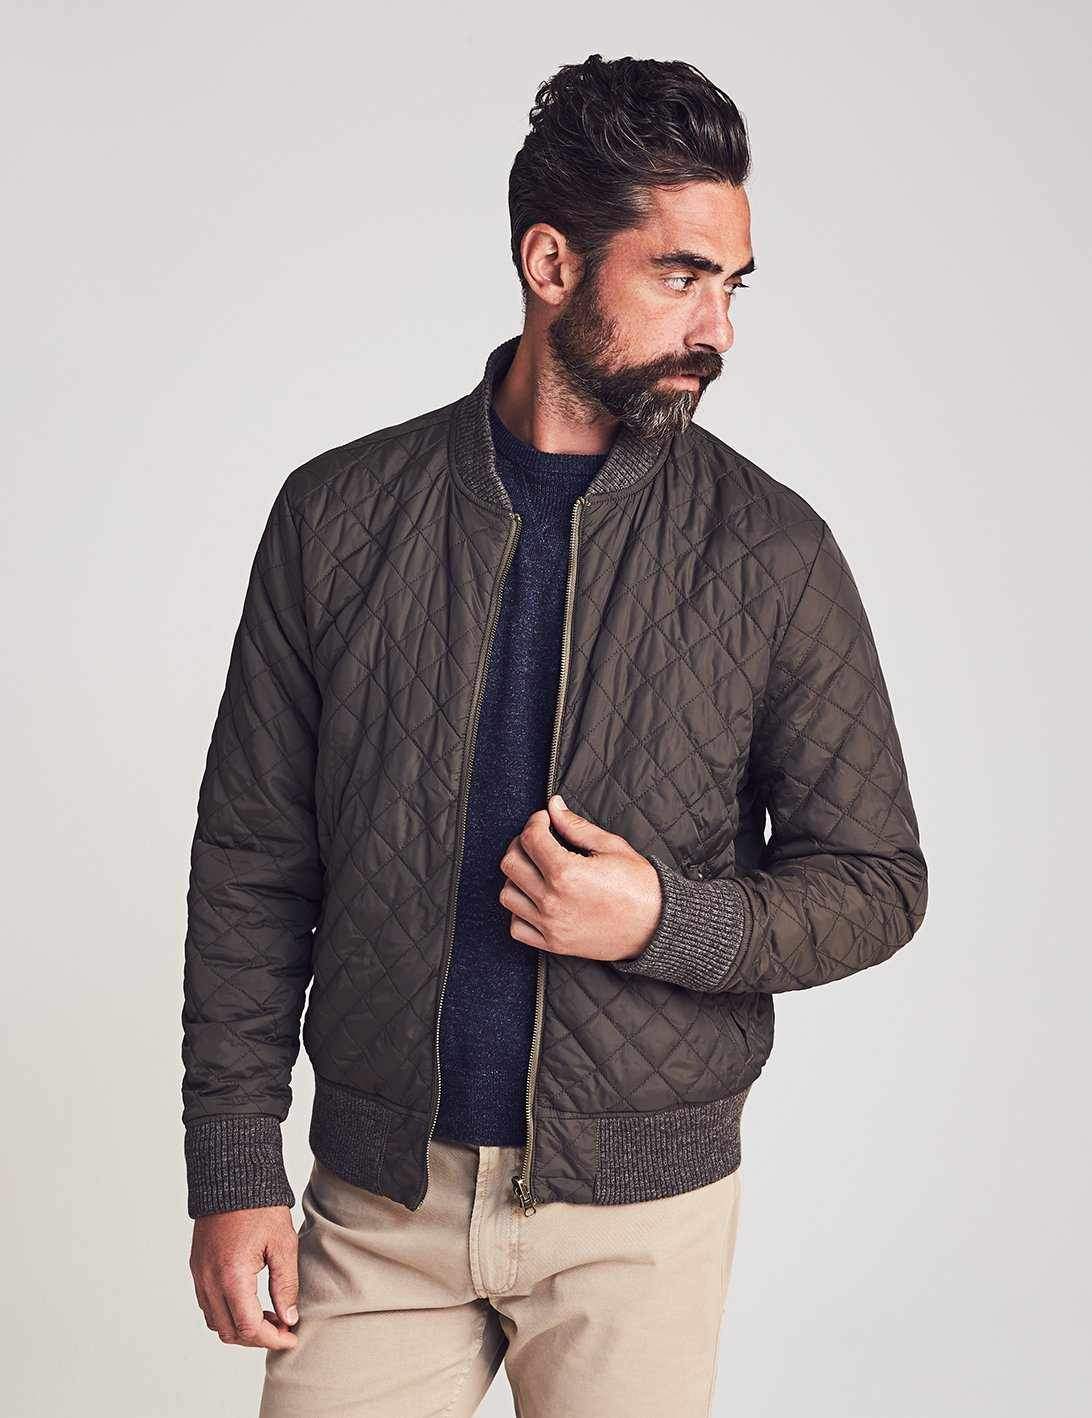 10 Must-Haves From Faherty Clothes To Upgrade Your Winter Style - BroBible